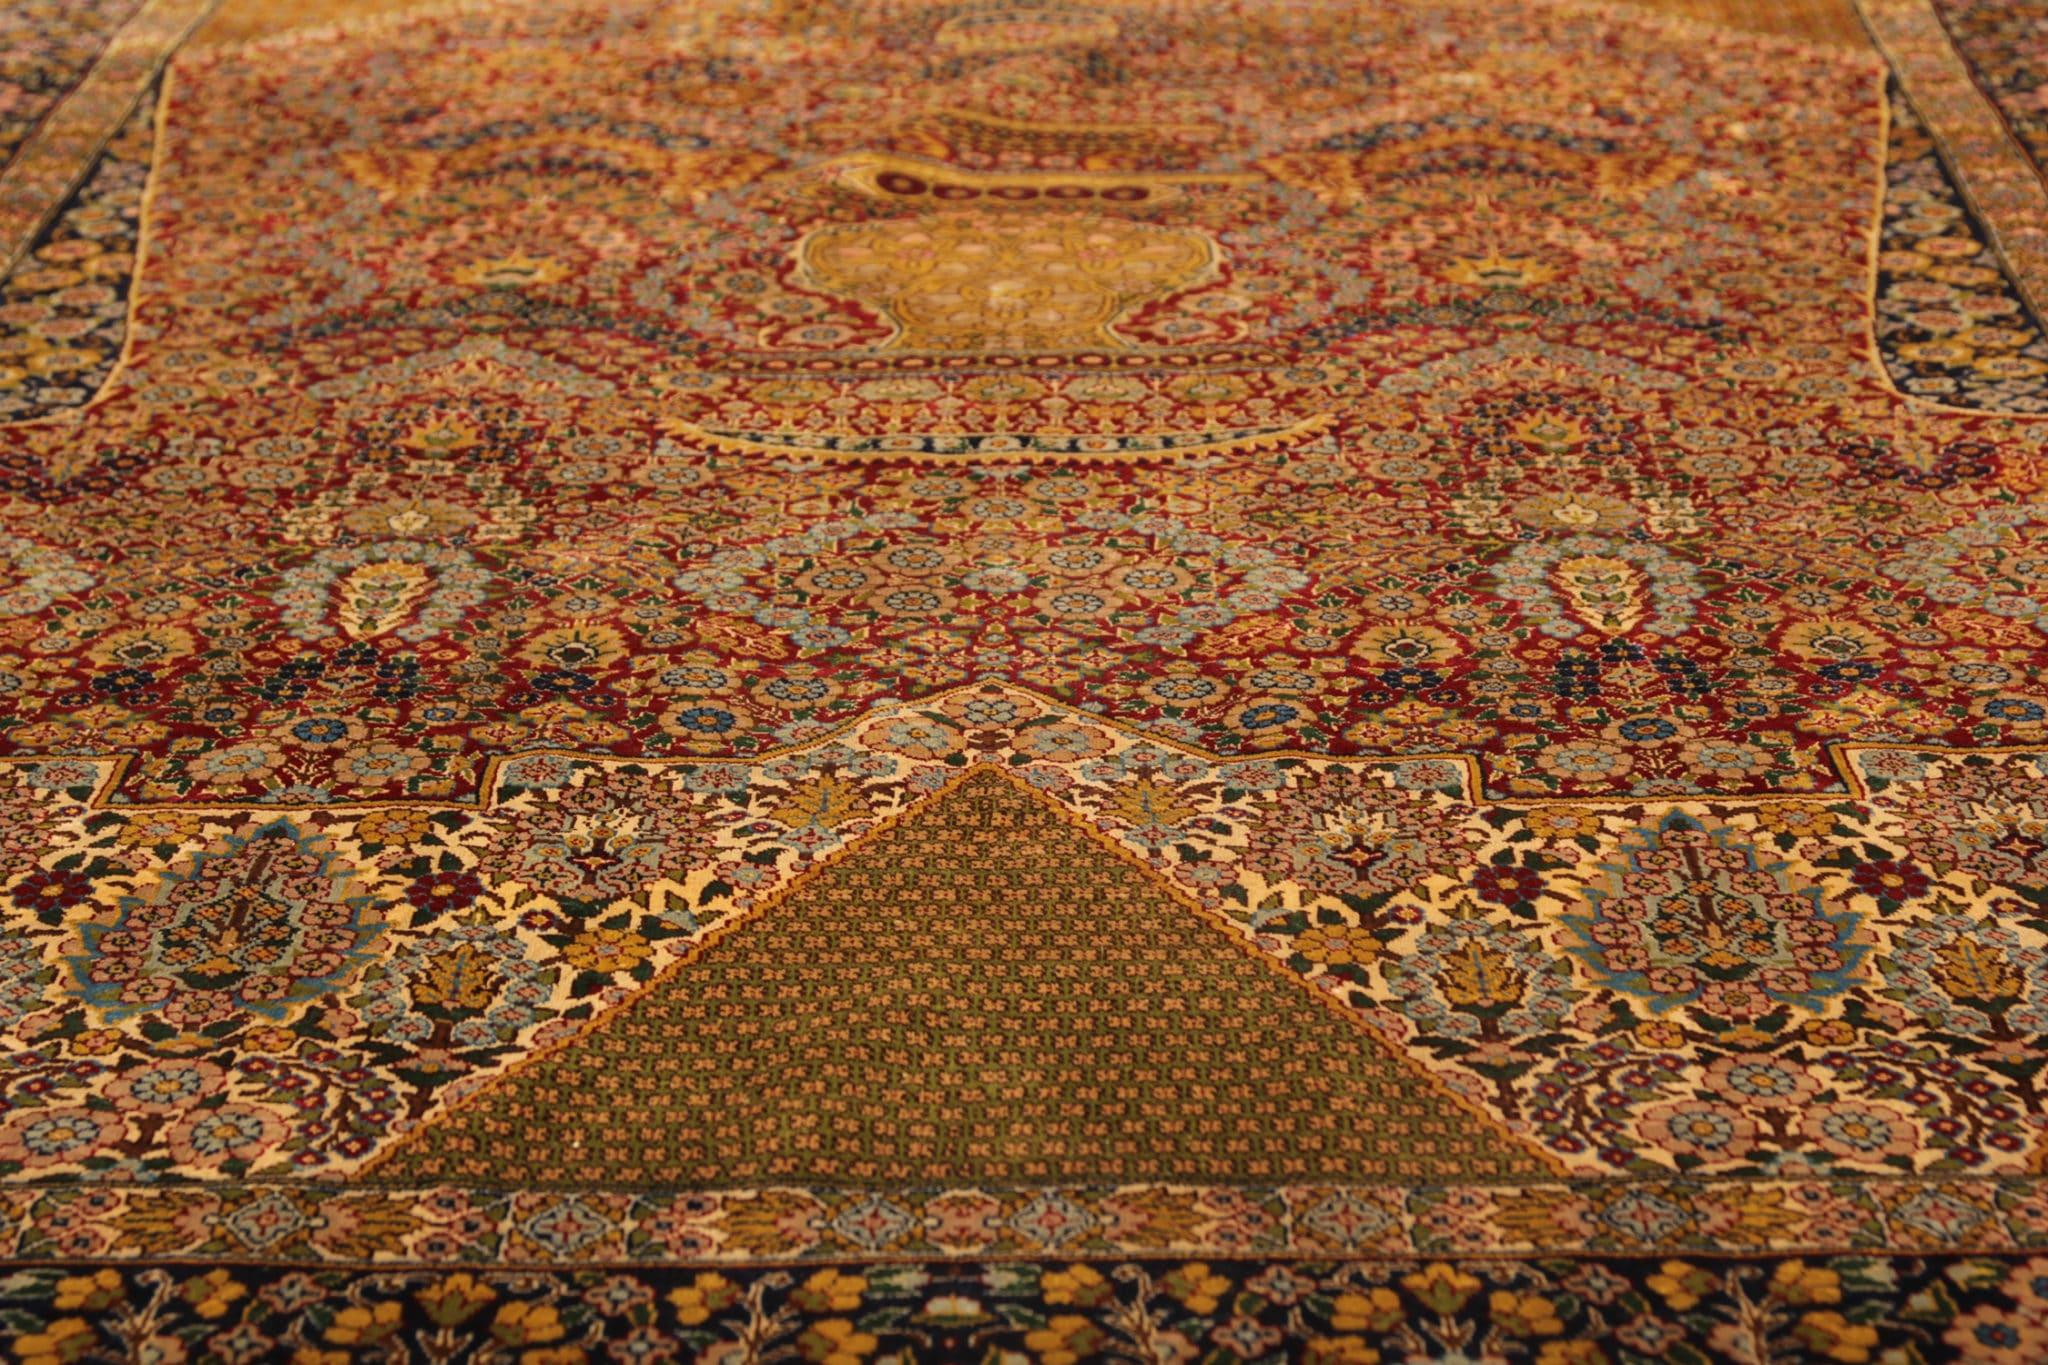 Transport yourself to a bygone era with our vintage silk rug, a testament to timeless elegance and craftsmanship. Hand-knotted with meticulous care, this exquisite carpet boasts a symphony of traditional motifs in rich shades of brown and gold,